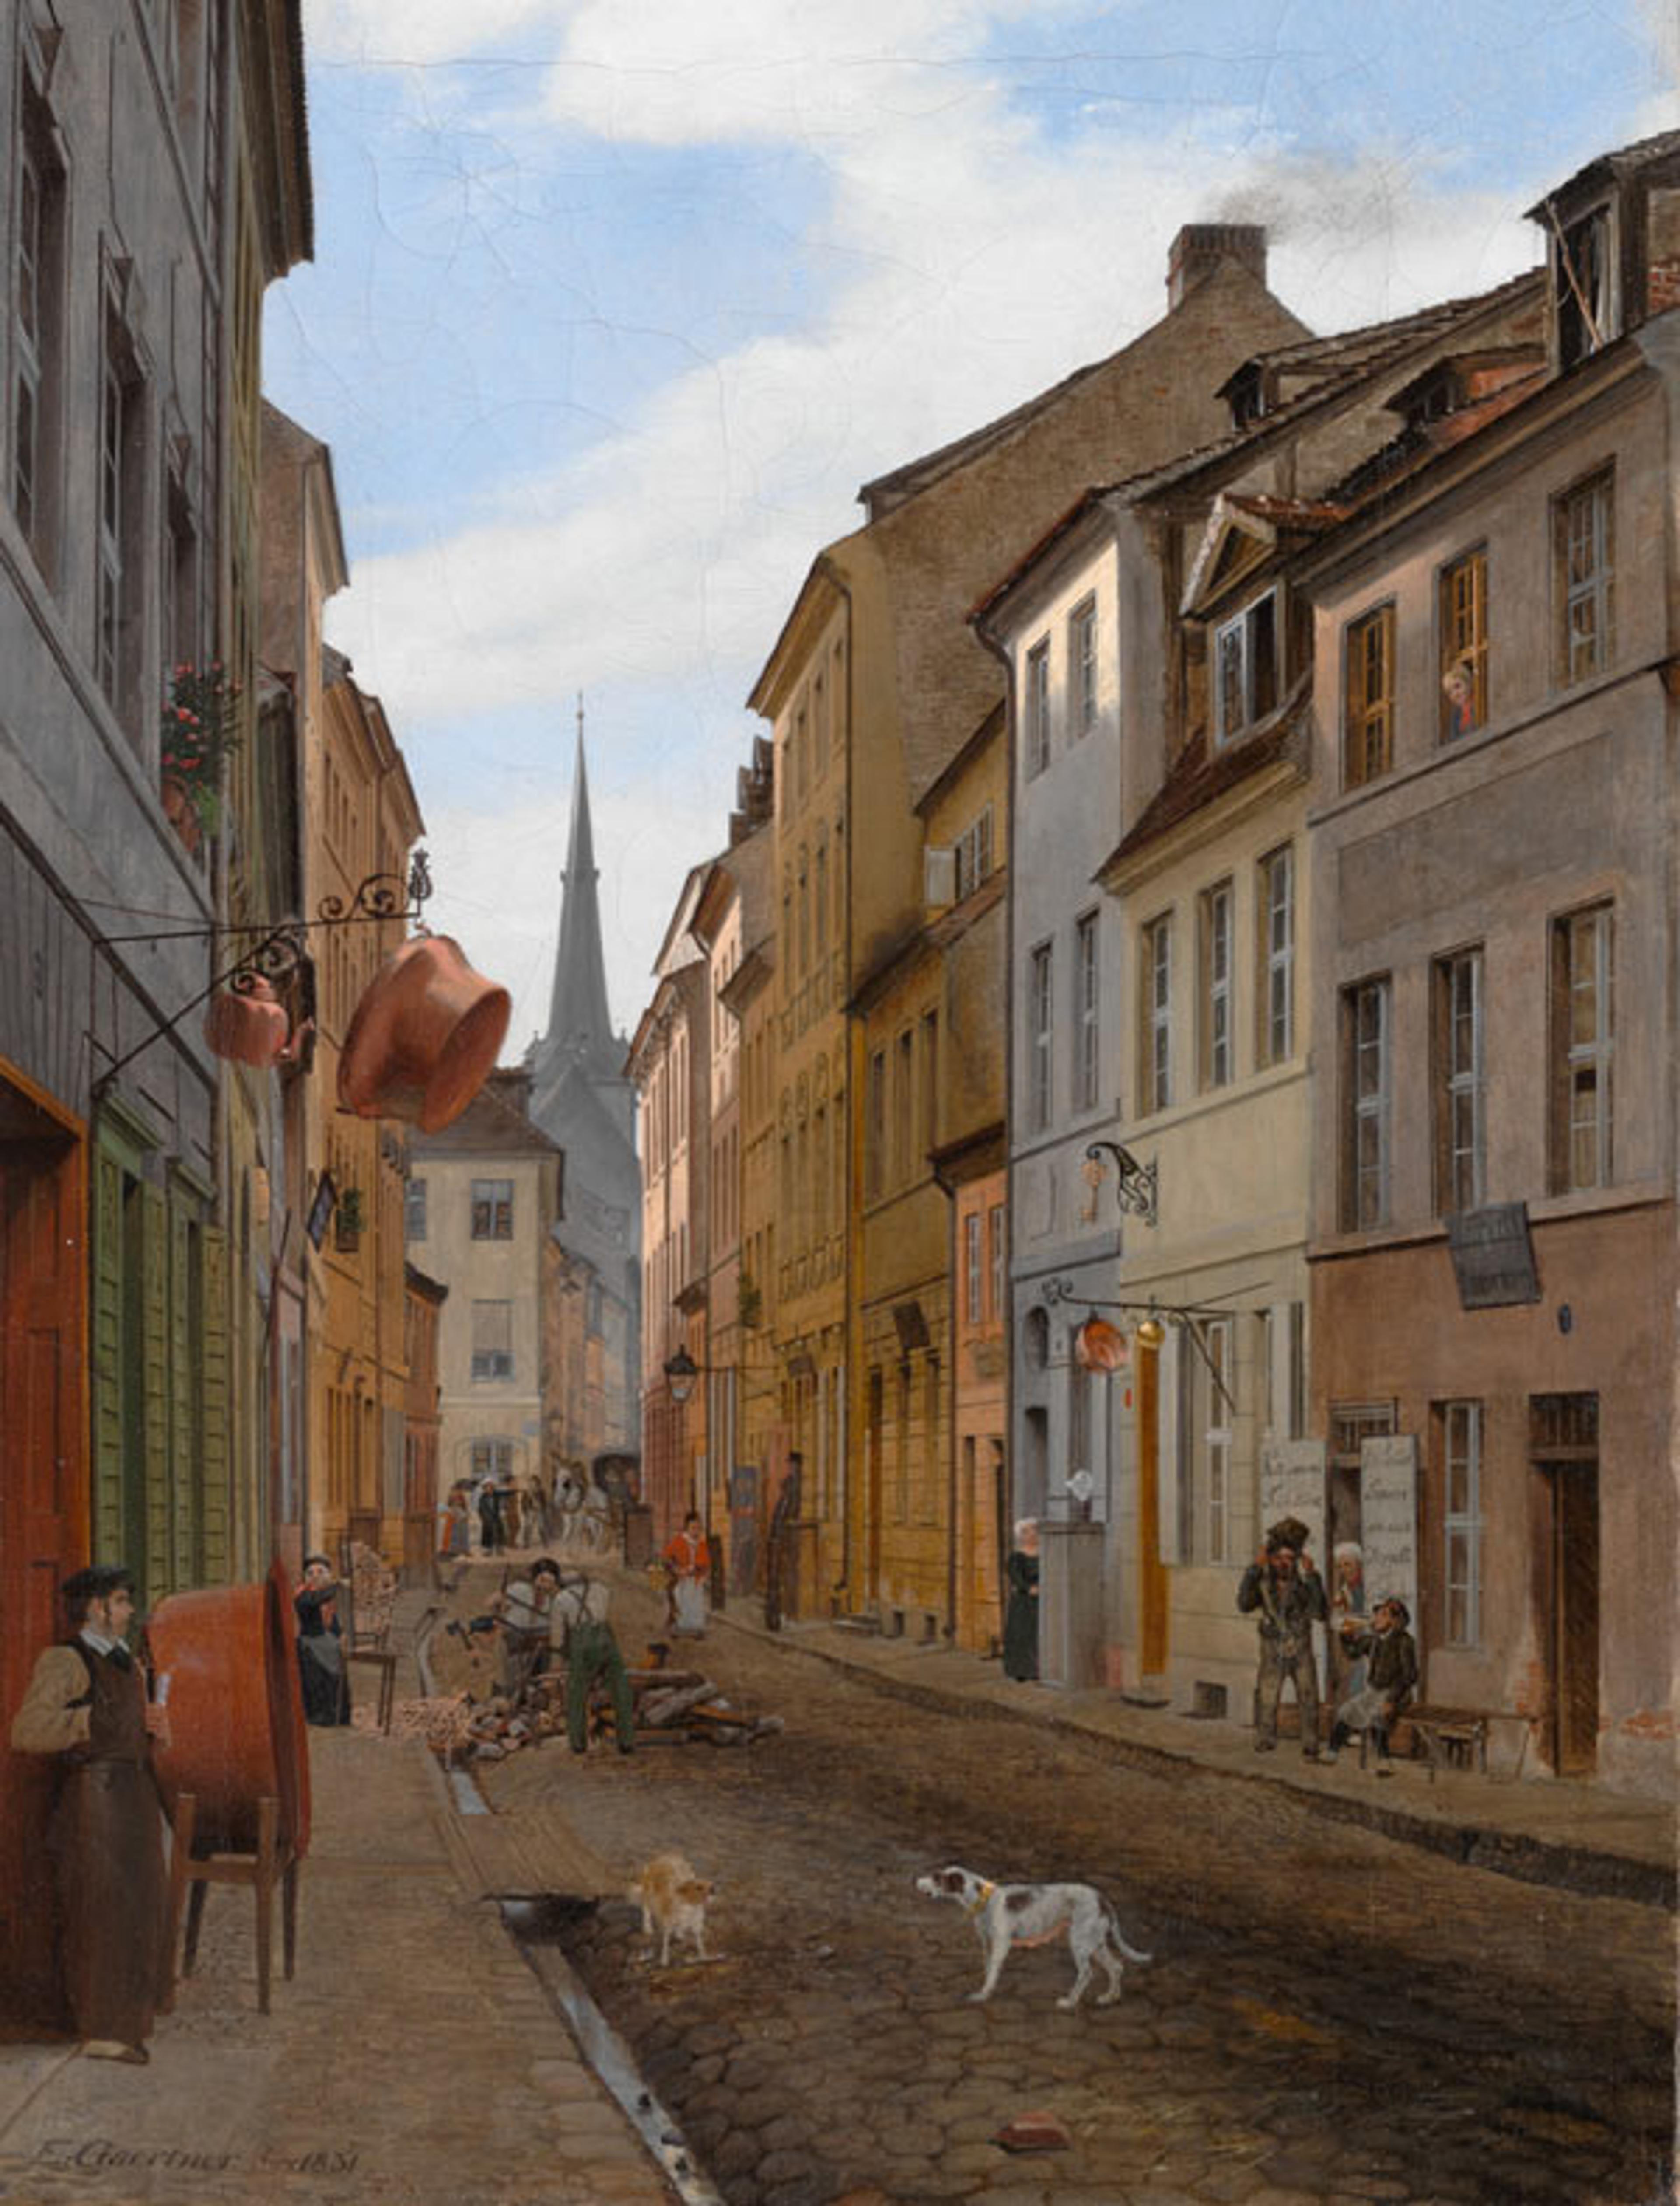 Eduard Gaertner (German, 1801–1877). Parochialstrasse in Berlin, 1831. Oil on canvas; 16 x 11 in. (40.6 x 27.9 cm). The Metropolitan Museum of Art, New York, Catharine Lorillard Wolfe Collection, Wolfe Fund, and funds from various donors, by exchange, 2006 (2006.258)